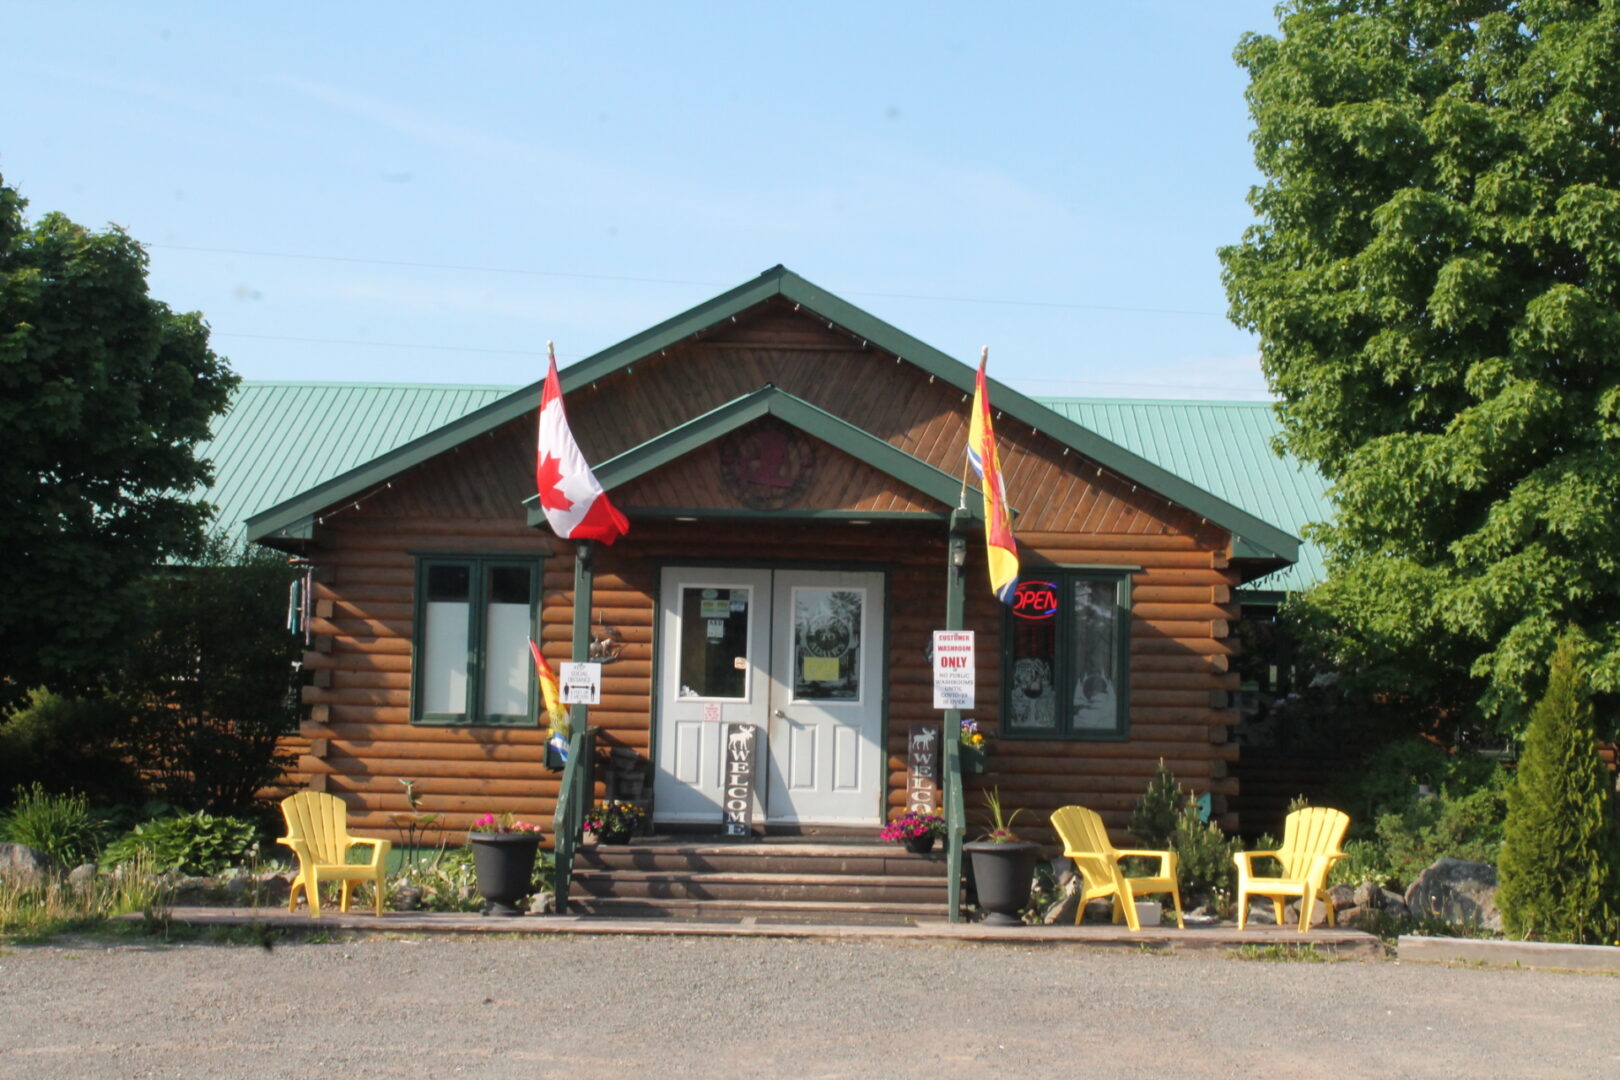 A building with chairs and flags on the front.